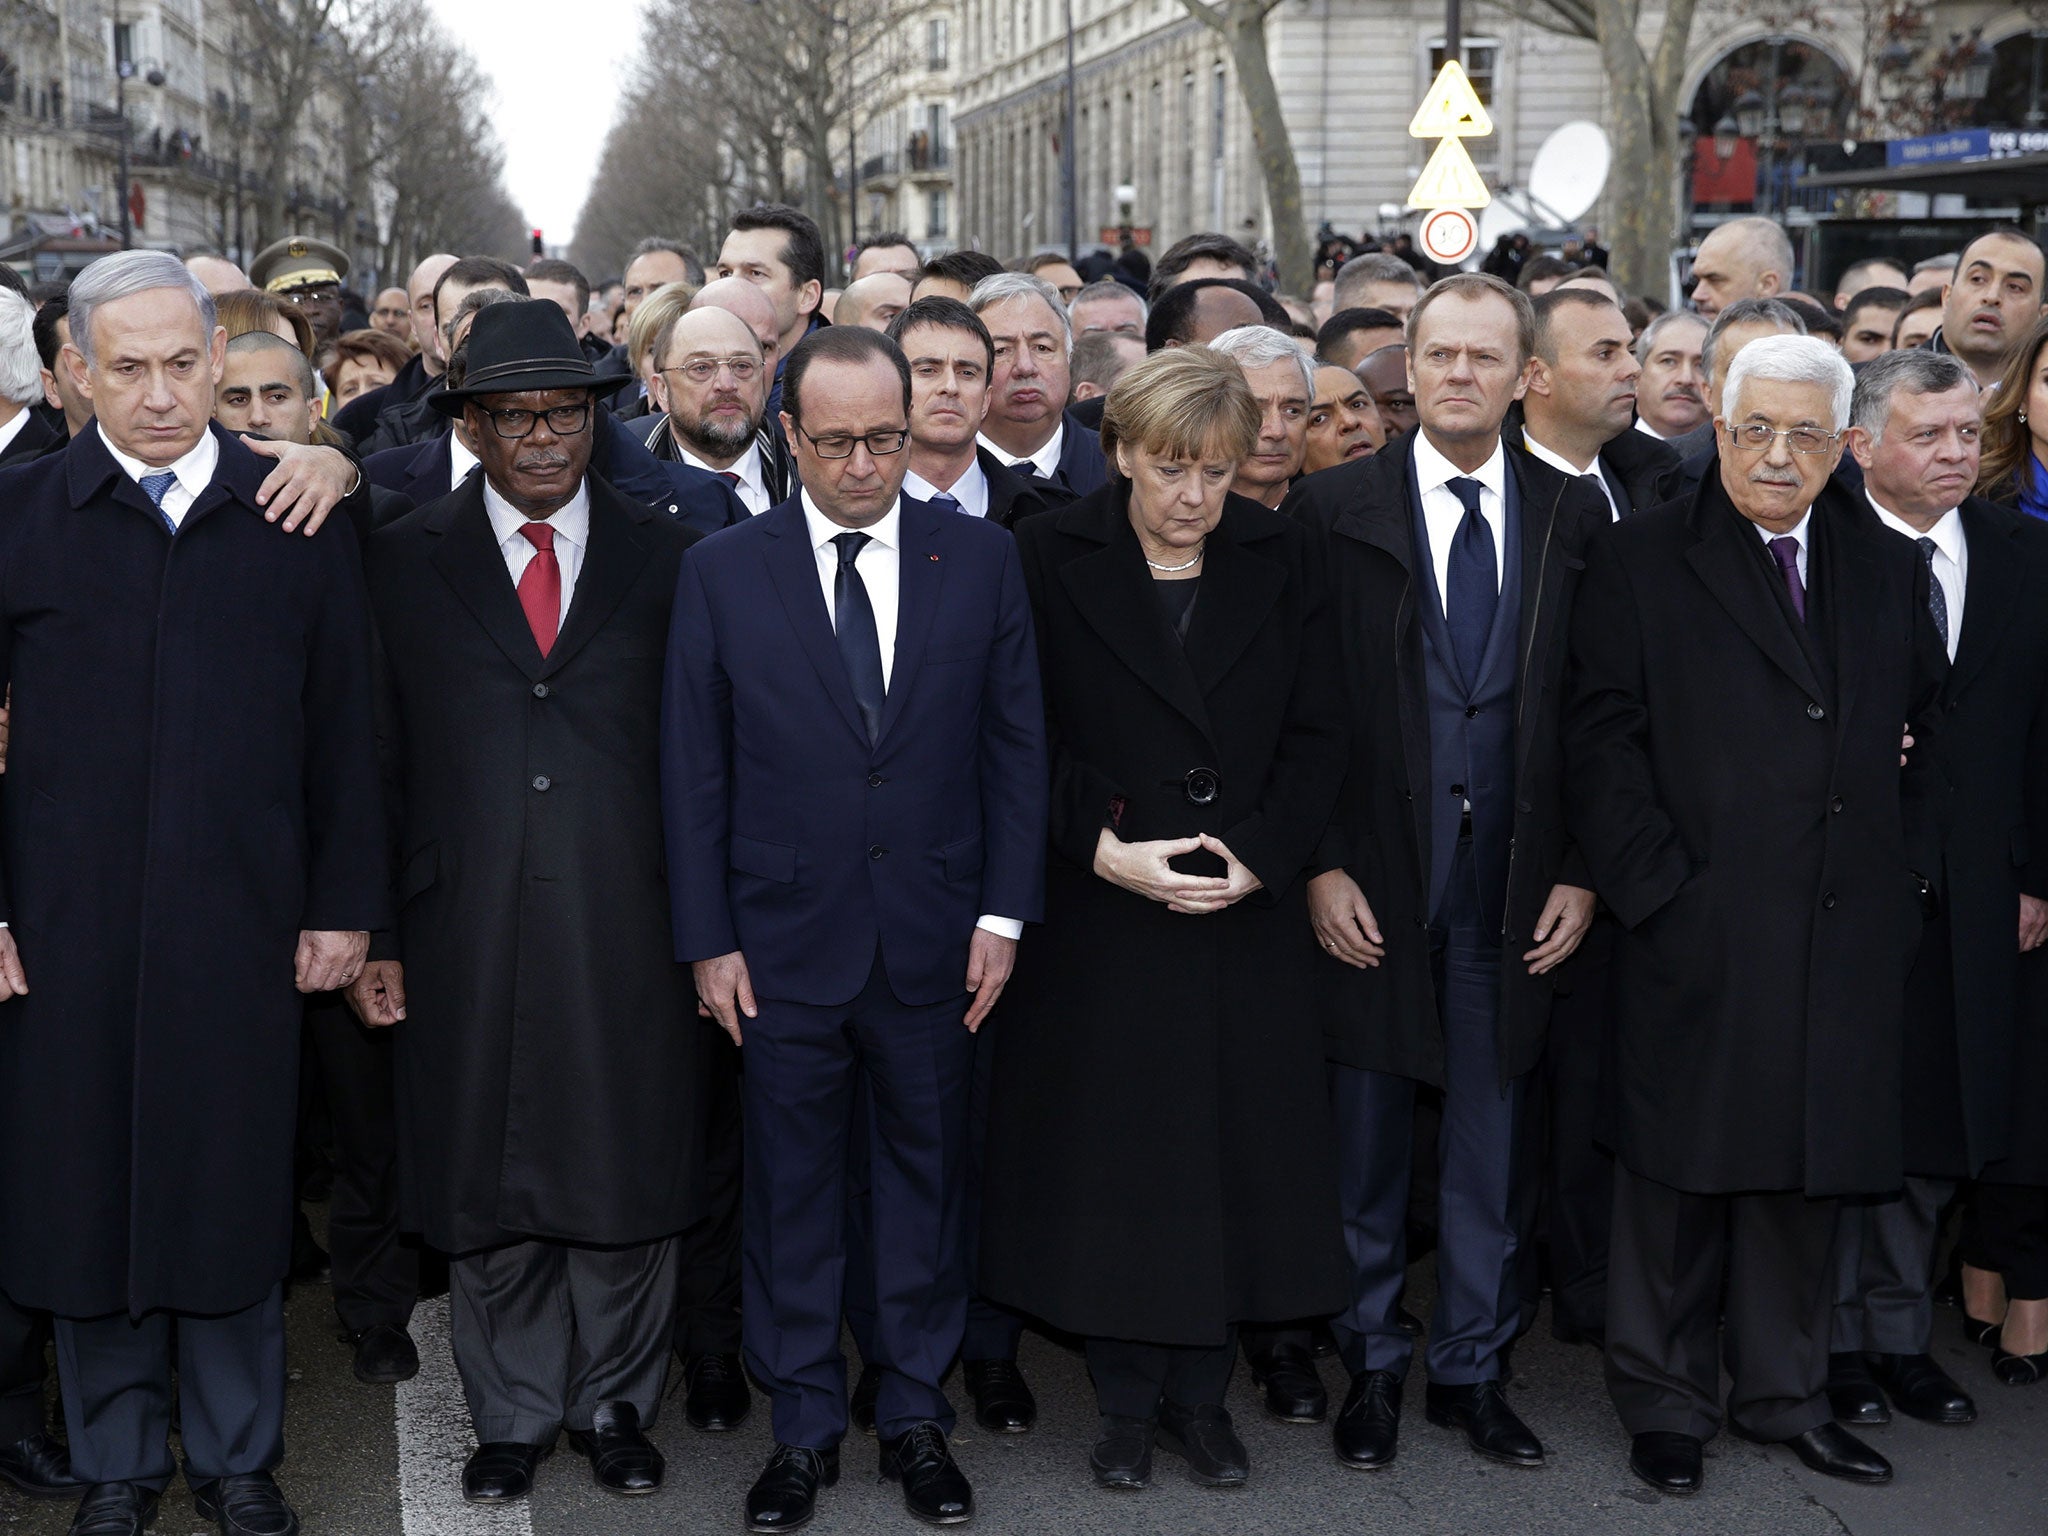 French President Francois Hollande observes a minute of silence surrounded by heads of state including (LtoR) Israel's Prime Minister Benjamin Netanyahu, Mali's President Ibrahim Boubacar Keita, Germany's Chancellor Angela Merkel, European Council Preside